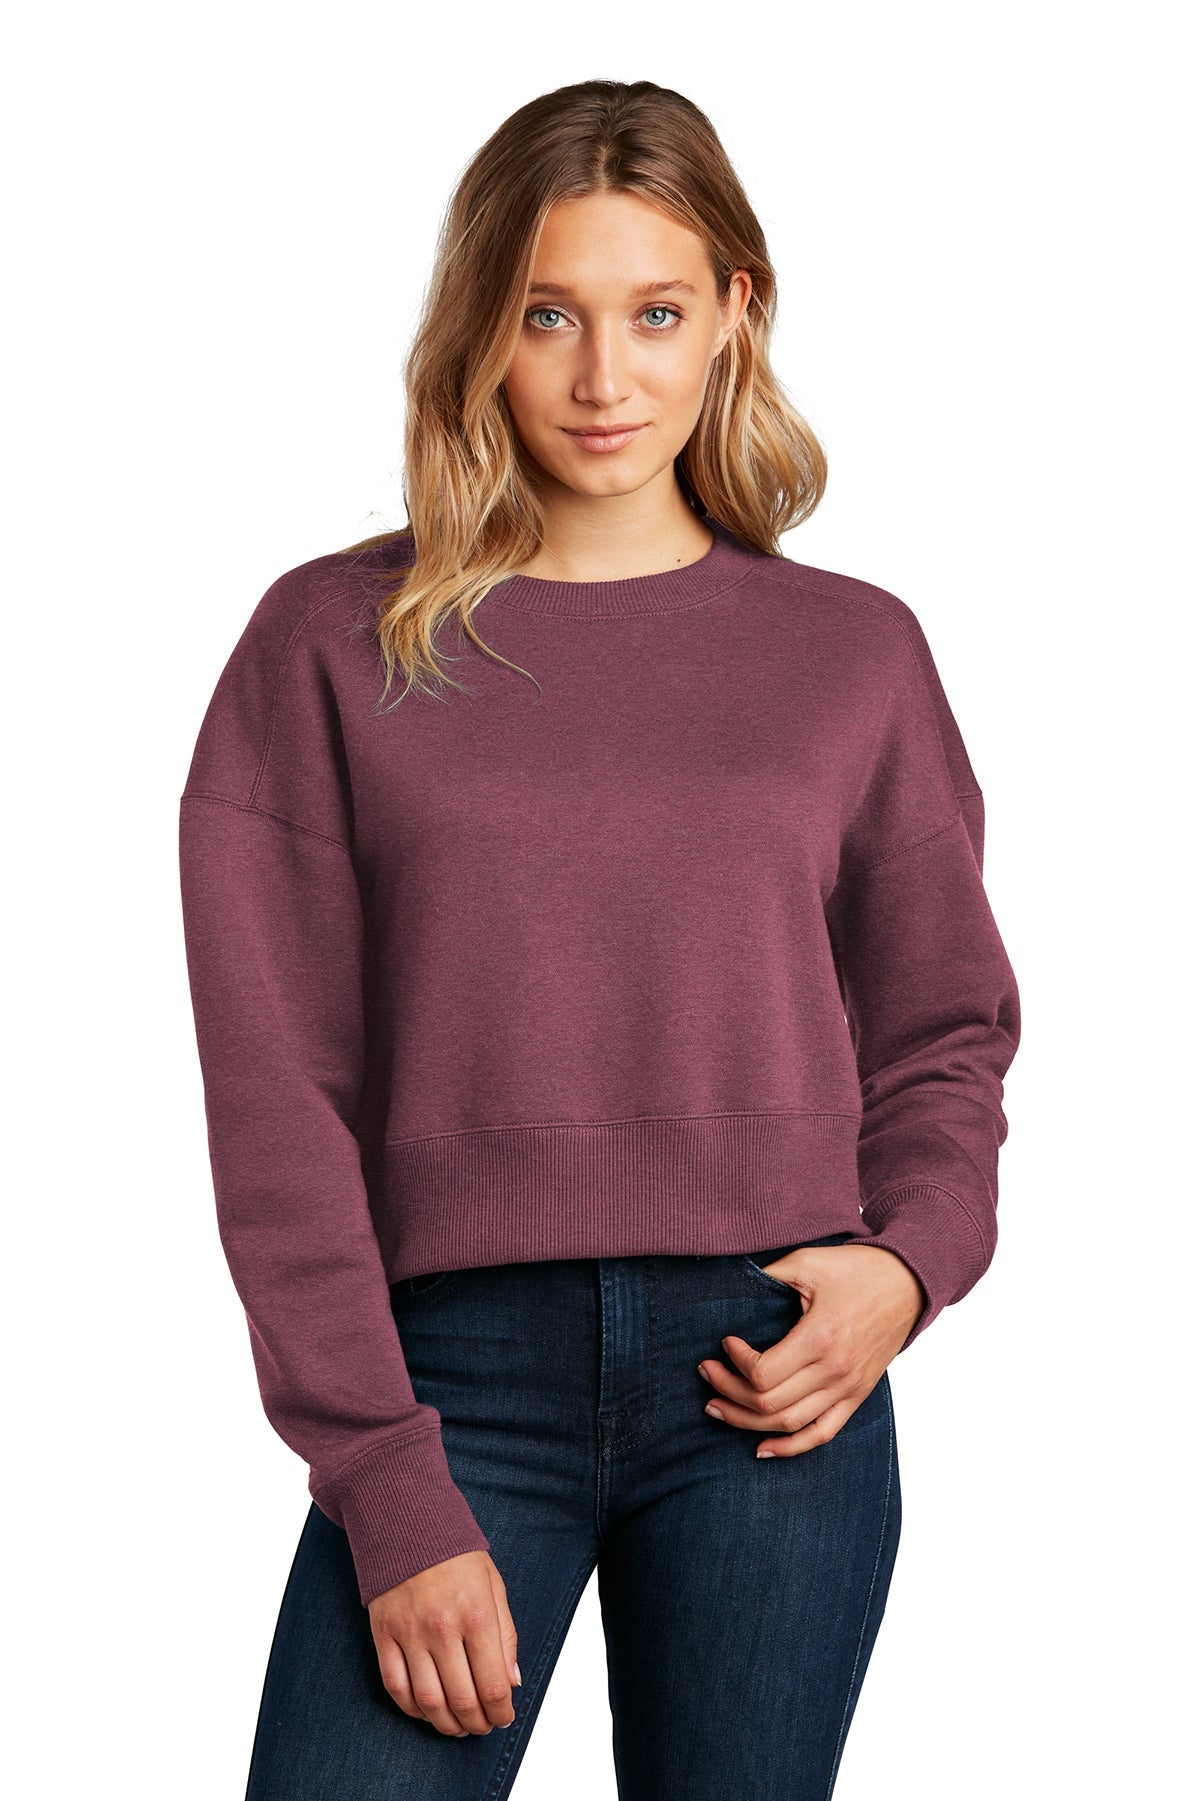 DT1105 District® Women’s Perfect Weight® Fleece Cropped Crew